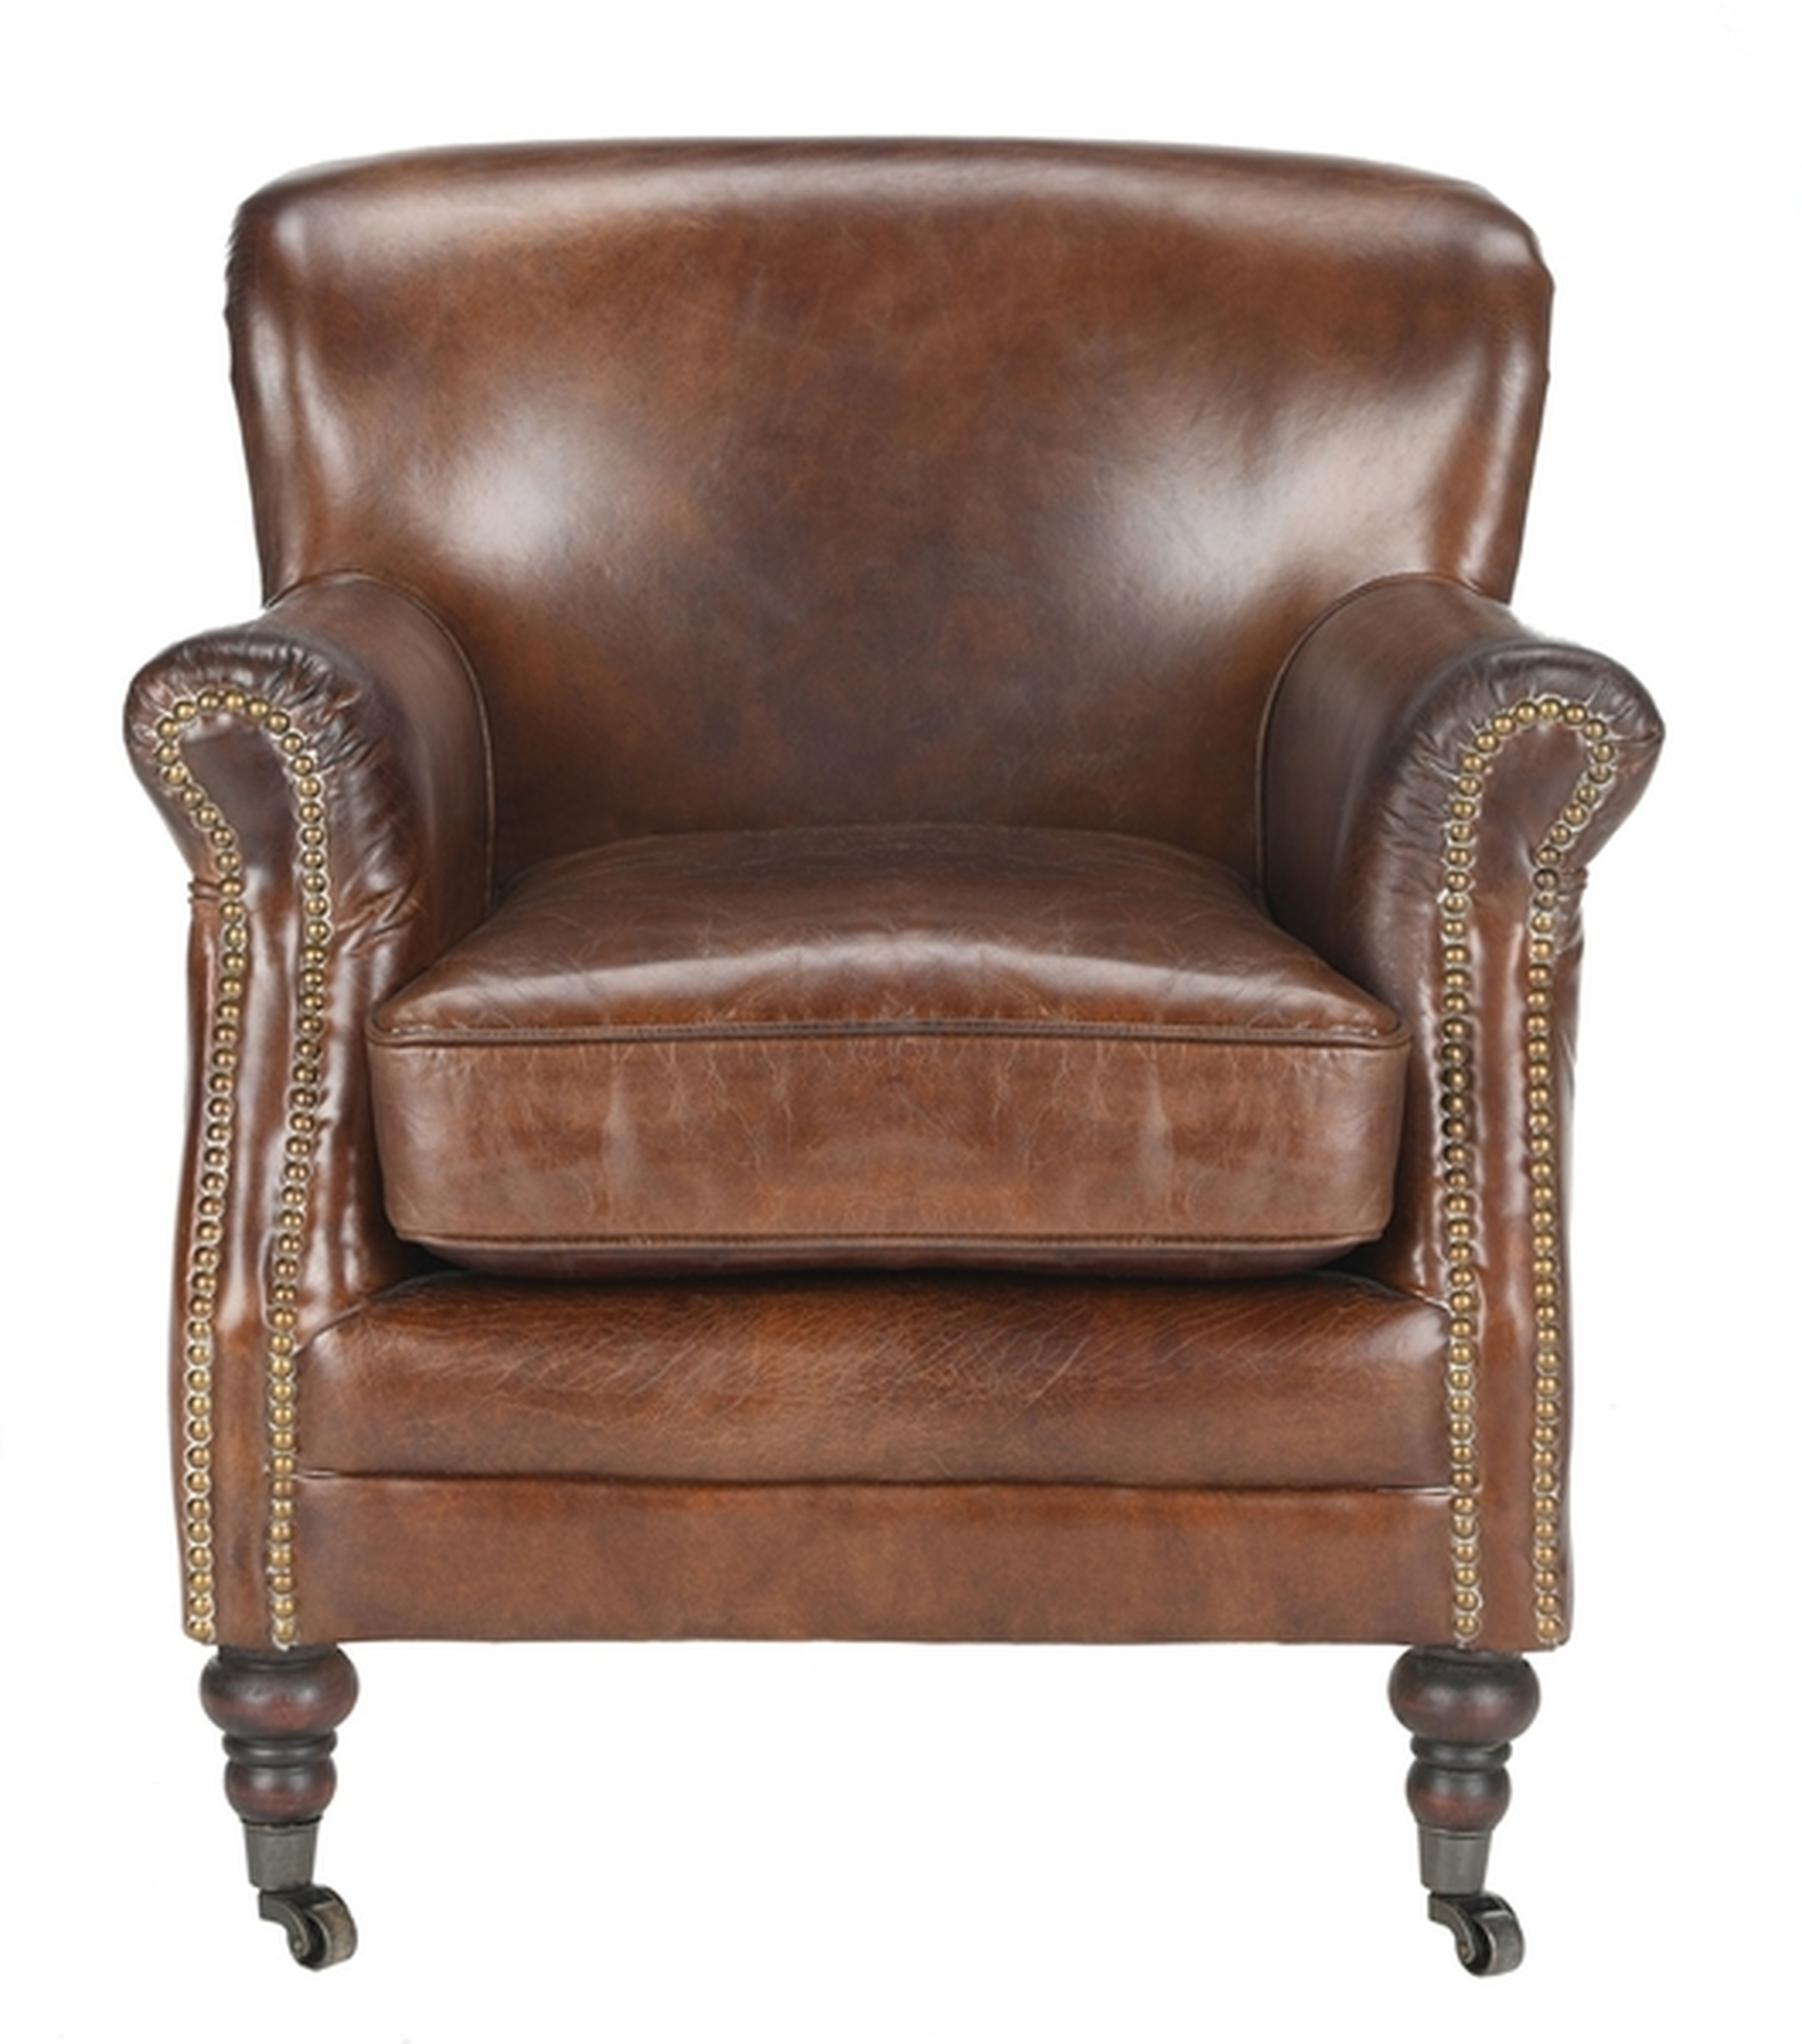 Manchester Leather Arm Chair - Vintage Cigar Brown - Arlo Home - Arlo Home